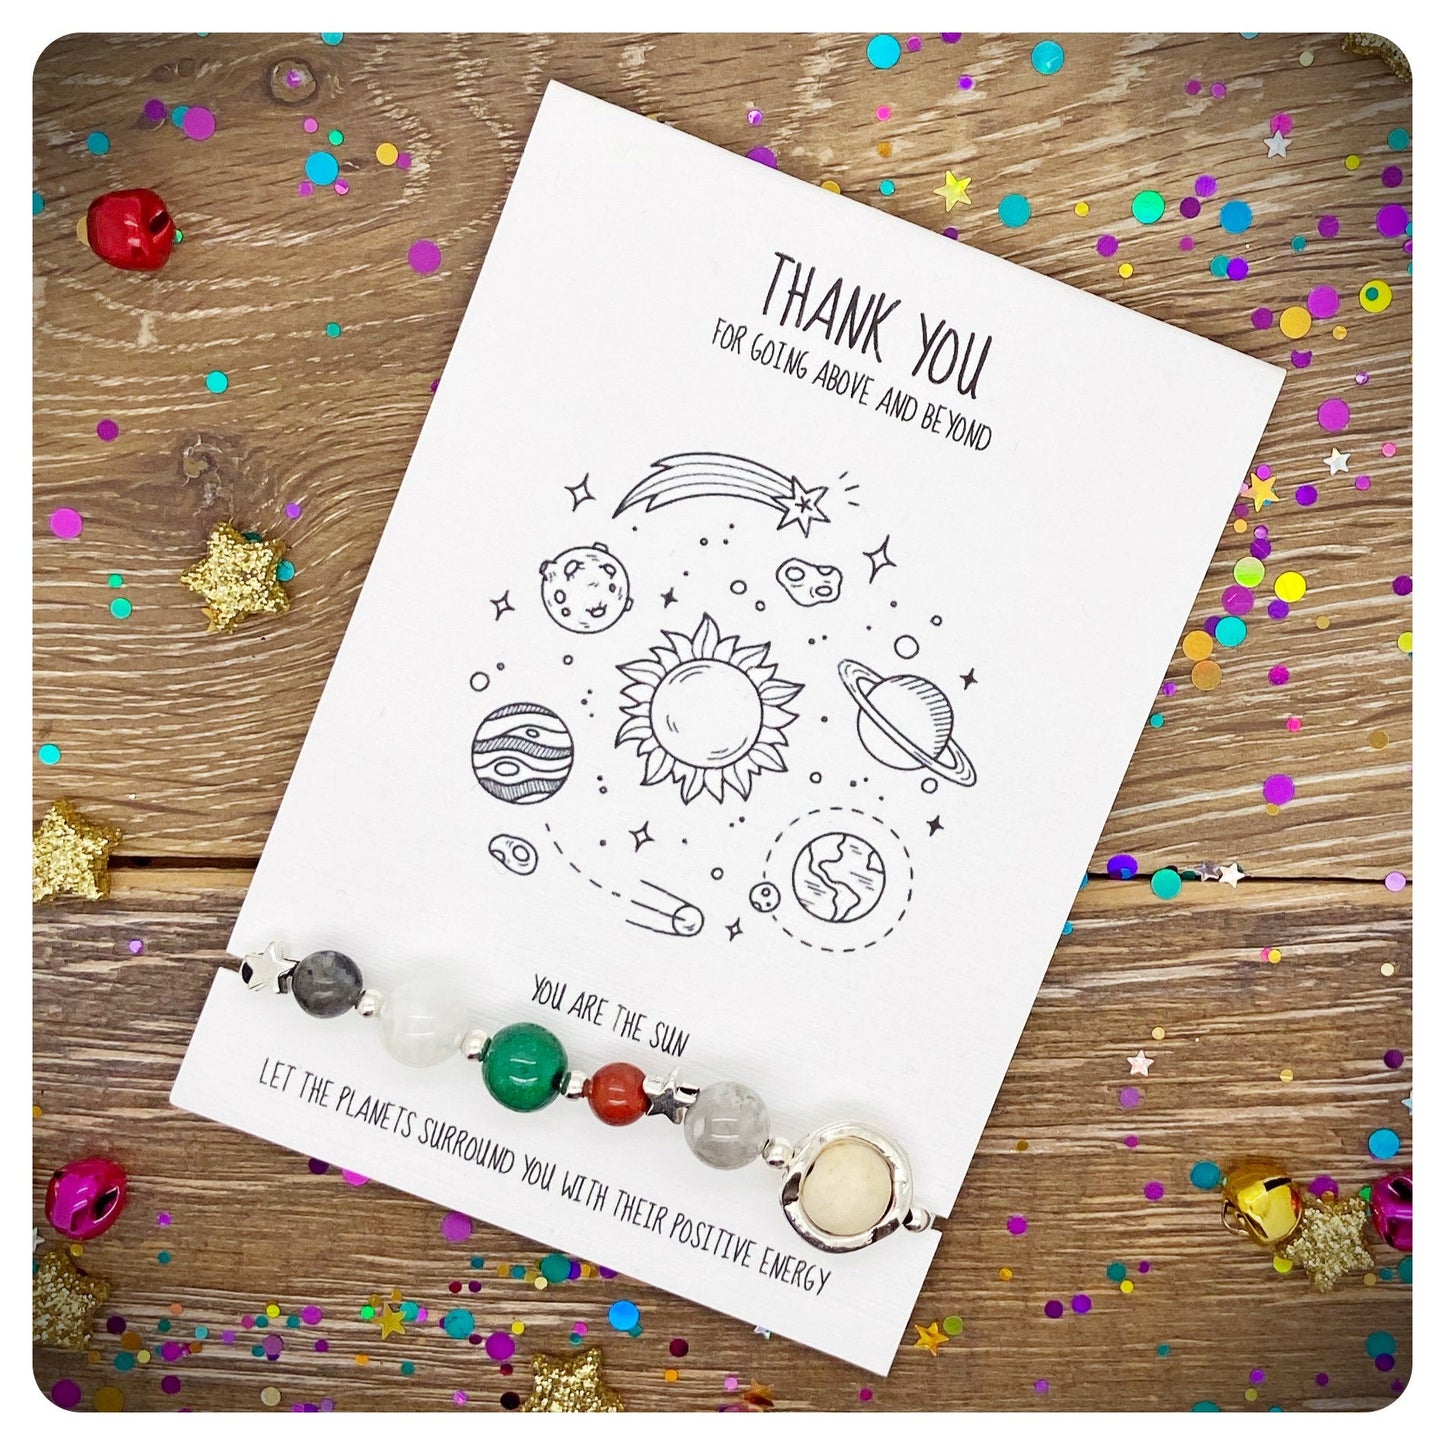 Thank You Space Gift, Above and Beyond Bracelet, Unique Thank You Gift, Employee Thank You Gift, Space Thank You Bracelet, Adjustable Solar